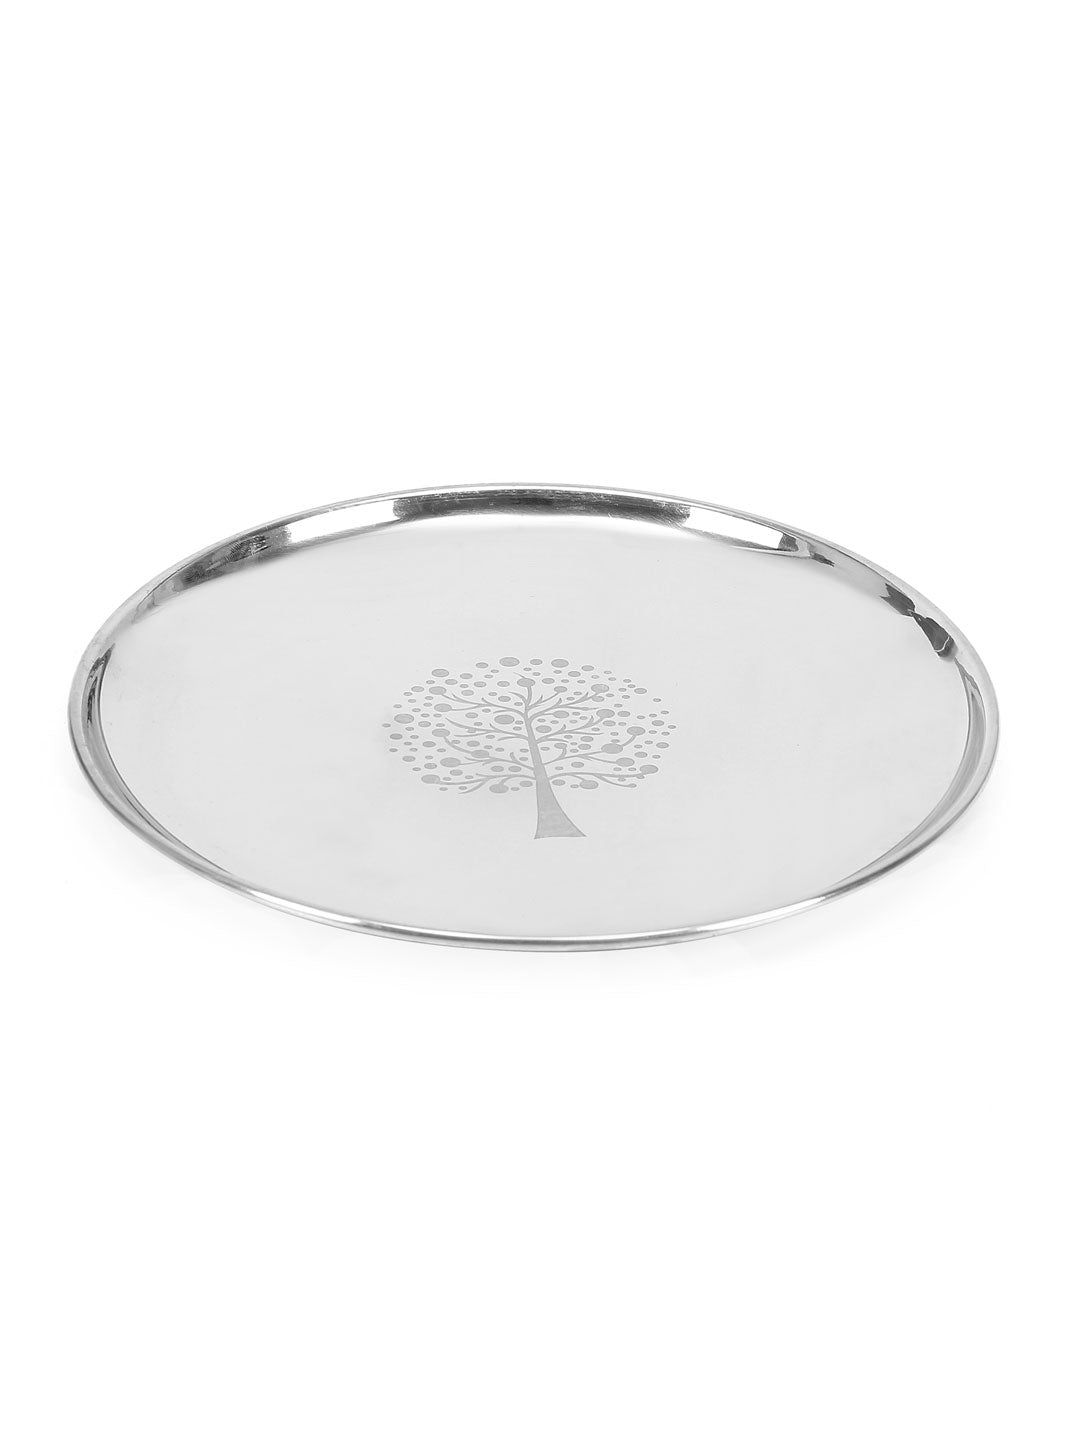 Athome by Nilkamal Silver-Toned & 1 Pieces Ceramic Glossy Plates Price in India